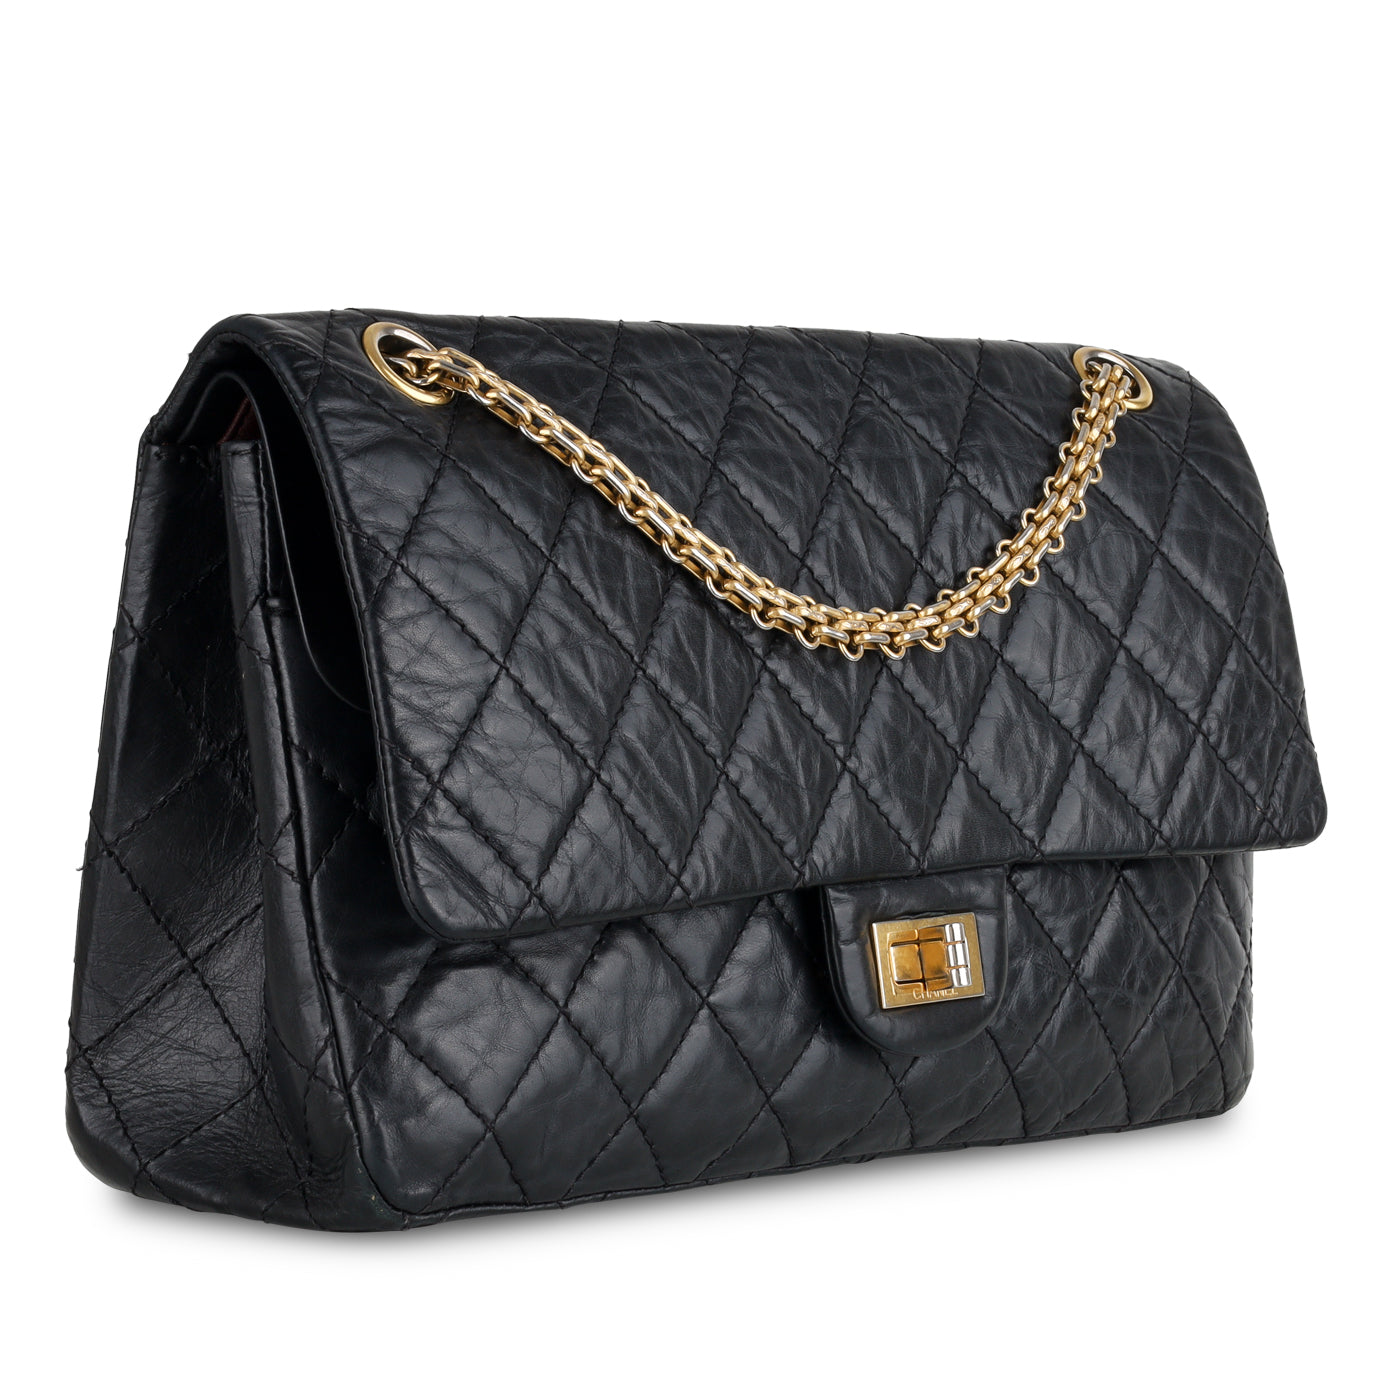 Chanel - 2.55 Re-issue Flap Bag - 226 - Gold Hardware - Black